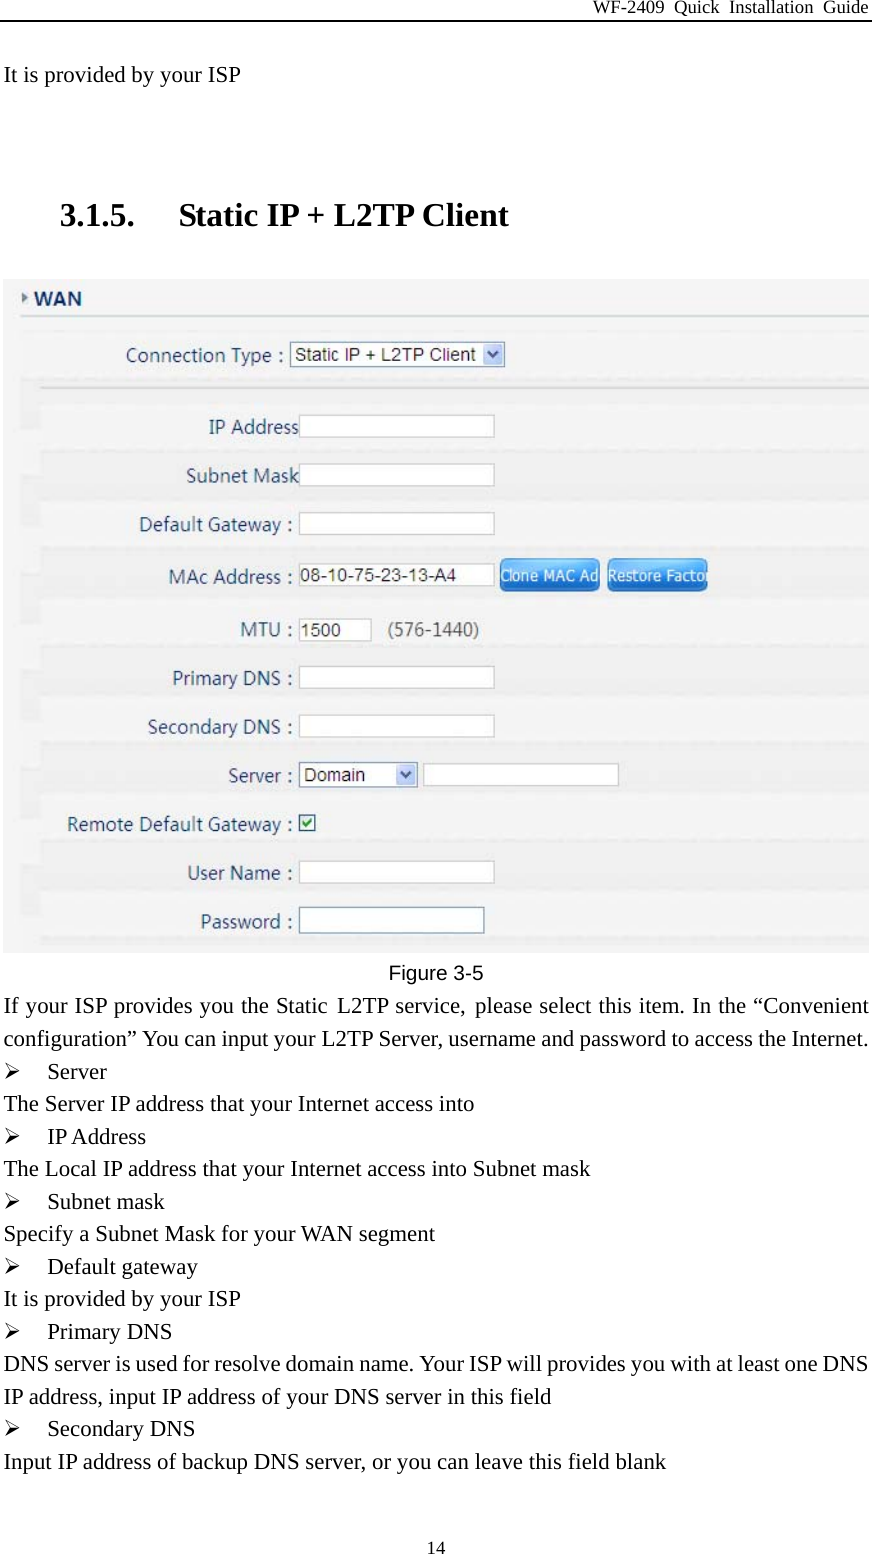 WF-2409 Quick Installation Guide  14It is provided by your ISP   3.1.5. Static IP + L2TP Client    Figure 3-5 If your ISP provides you the Static L2TP service, please select this item. In the “Convenient configuration” You can input your L2TP Server, username and password to access the Internet.  Server The Server IP address that your Internet access into  IP Address The Local IP address that your Internet access into Subnet mask  Subnet mask Specify a Subnet Mask for your WAN segment  Default gateway It is provided by your ISP  Primary DNS DNS server is used for resolve domain name. Your ISP will provides you with at least one DNS IP address, input IP address of your DNS server in this field  Secondary DNS Input IP address of backup DNS server, or you can leave this field blank  